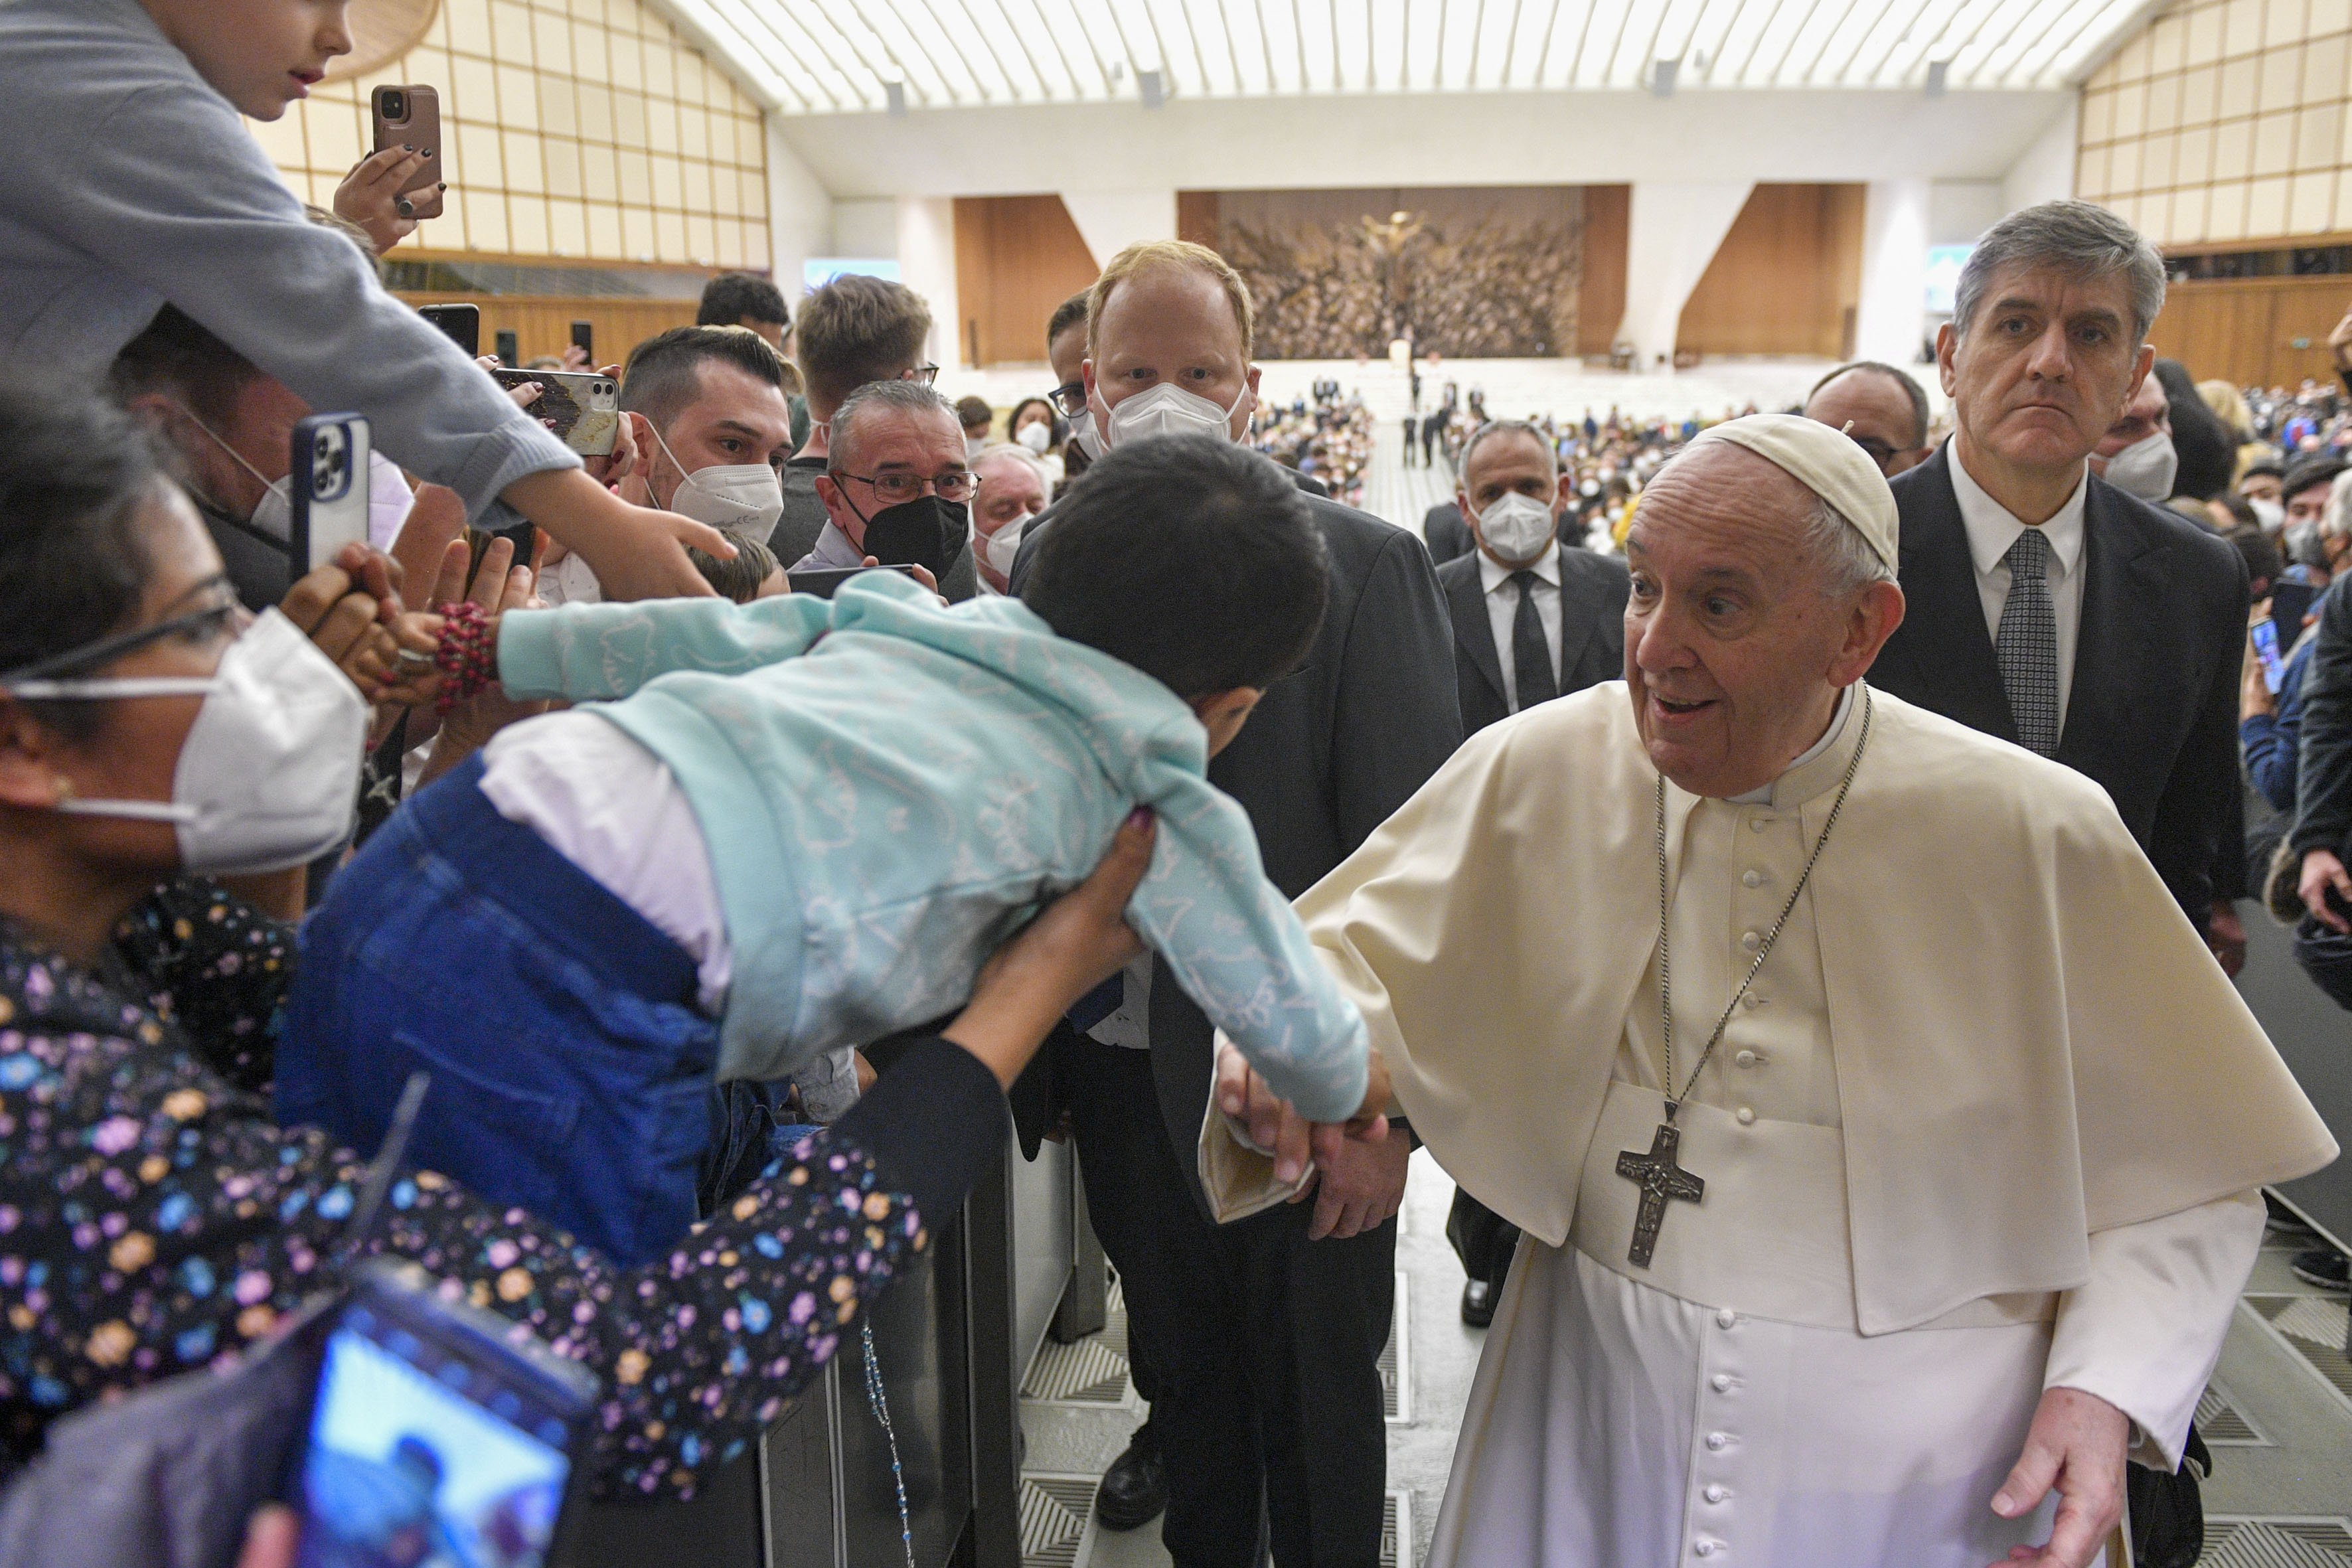 Pope Francis greets a child during his general audience in the Paul VI hall at the Vatican Feb. 23, 2022. (CNS photo/Paul Haring)